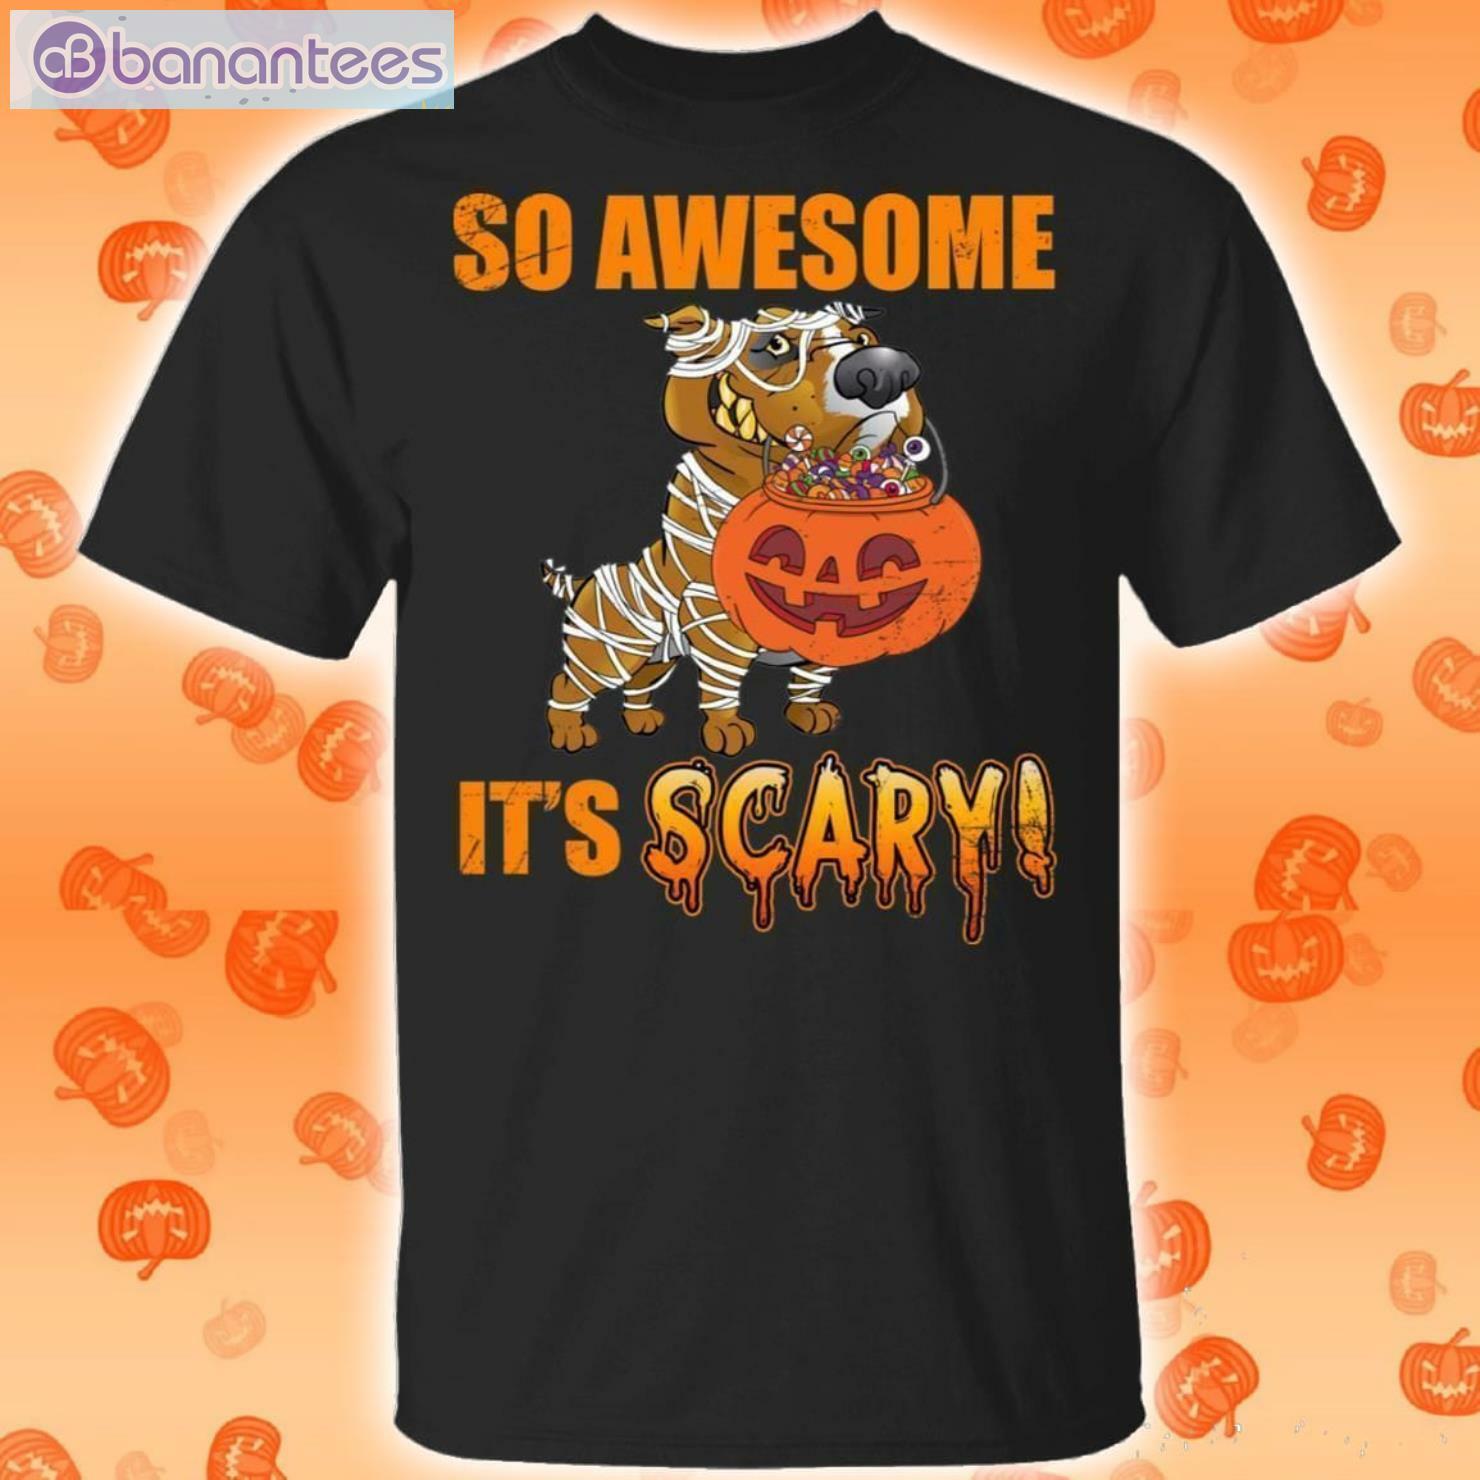 So Awesome It's Scary T-Shirt With Pit Bull Halloween Product Photo 1